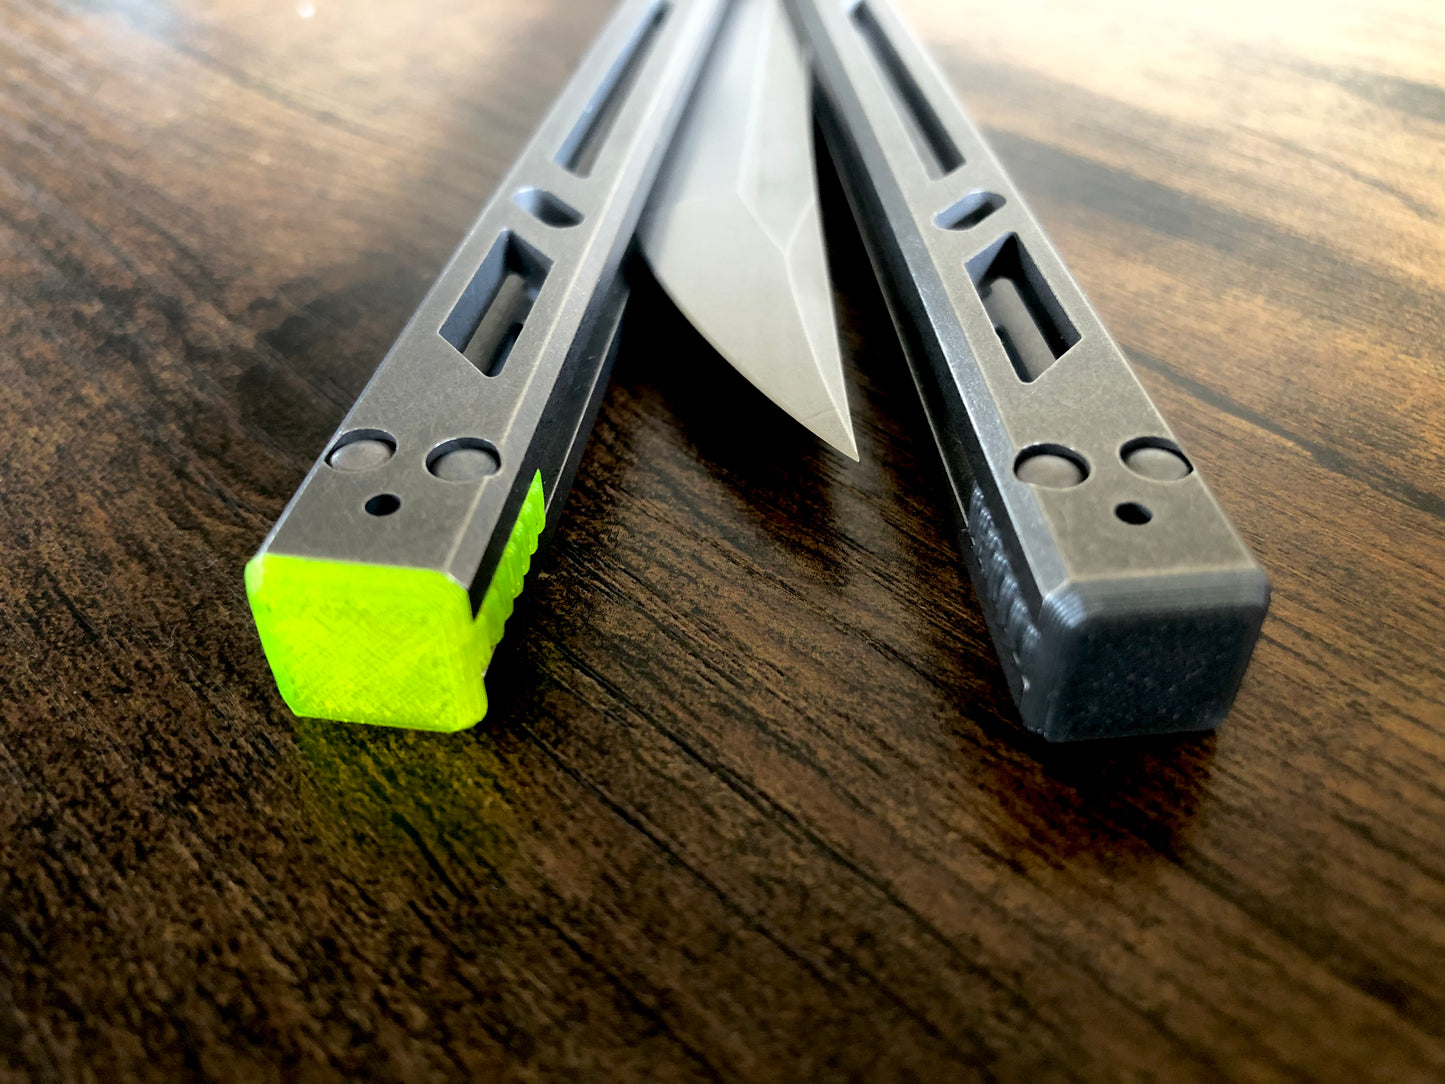 These Zippy spacers are designed for the BRS Barebones and Tibones, and are made in-house from a rubbery, shatter-proof polyurethane. The spacers are offered as either extensions or full-length "flush" spacers. The full-length spacers offer a slightly more neutral balance, while the extensions round the edges for comfort and protect the handles from drops. Both spacers feature positive jimping and enable adjustable balance with up to 1x removable tungsten weight per spacer. 